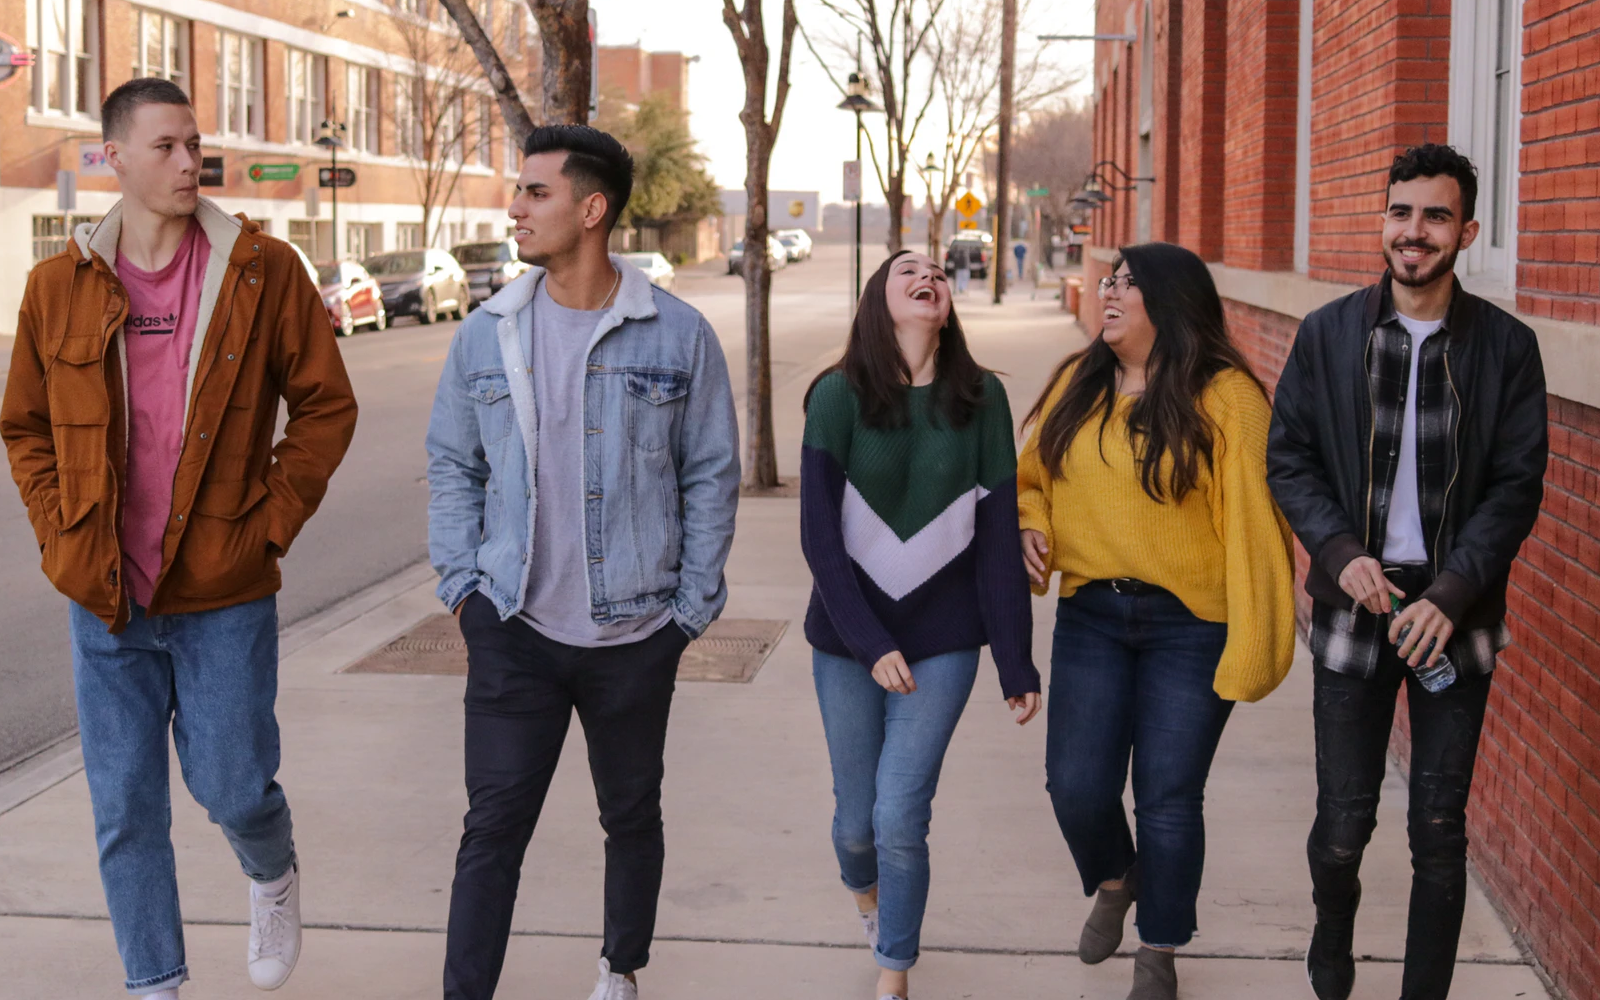 Image of a group of college renters walking down a street and outside apartments